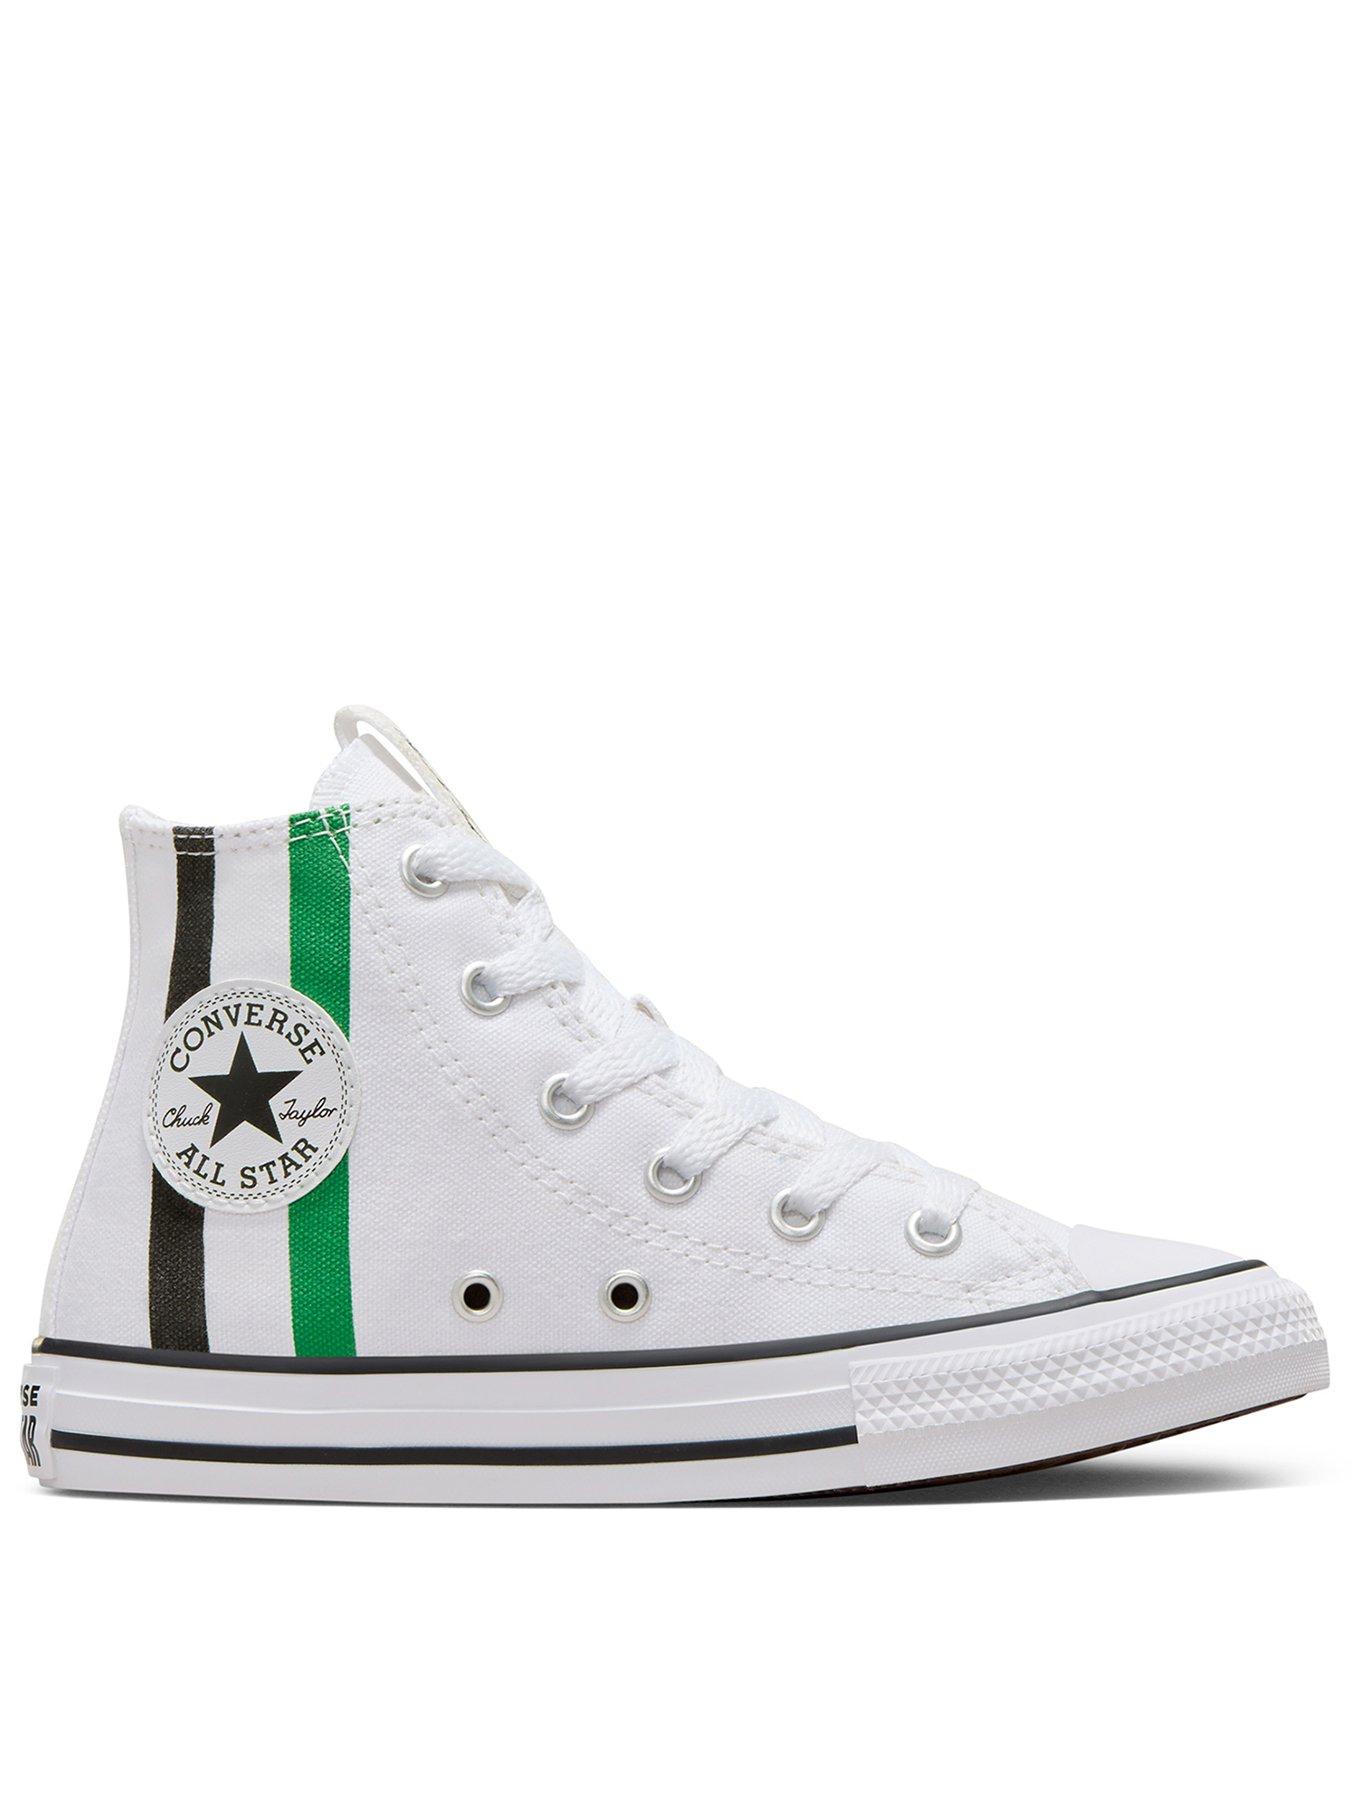 Converse Kids Girls Home Team High Tops Trainers - White/Green, White/Green, Size 1 Older